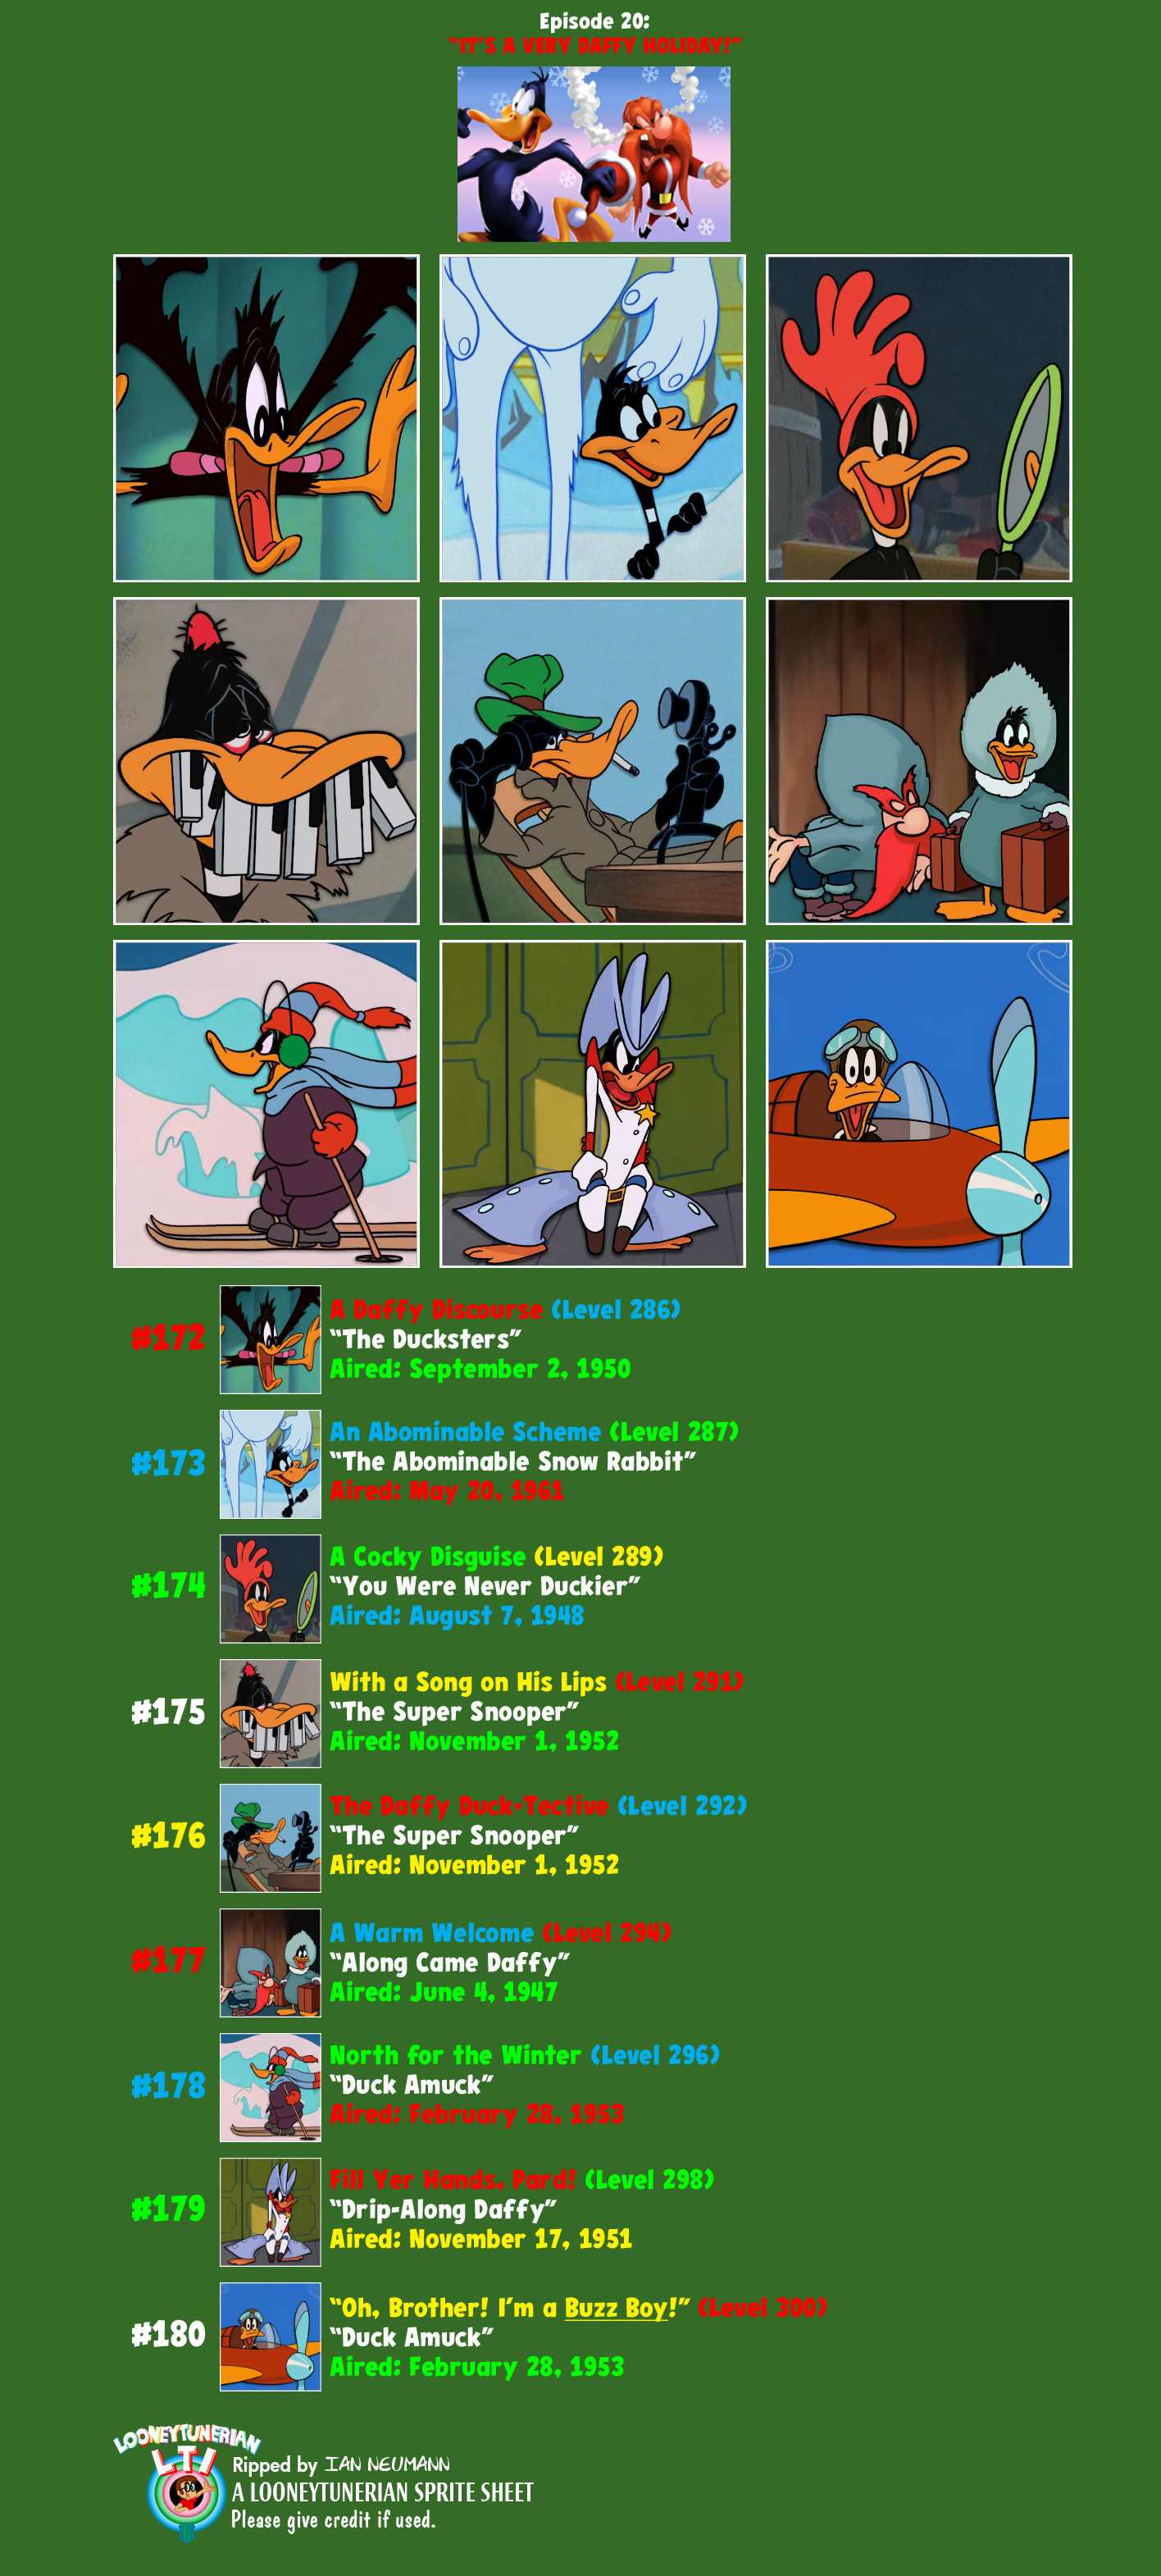 Looney Tunes Dash! - Episode 20: "It's A Very Daffy Holiday!"